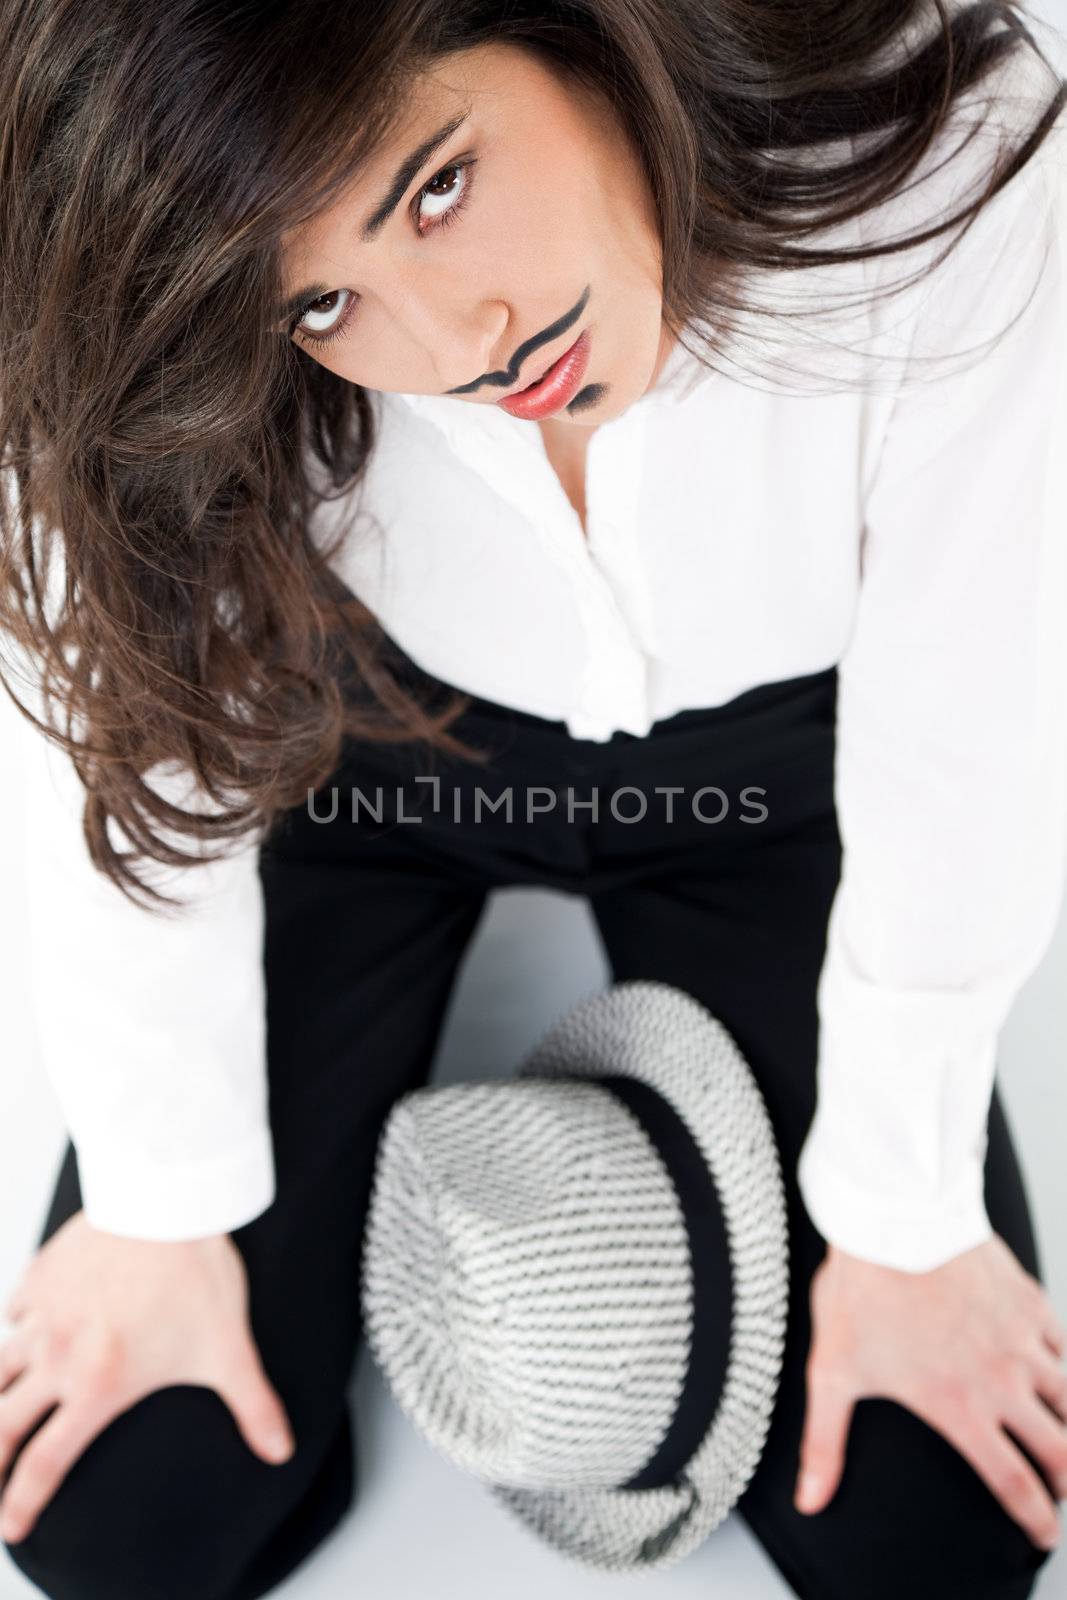 beautiful girl with moustache dendy makeup sitting with hat, looking up at camera